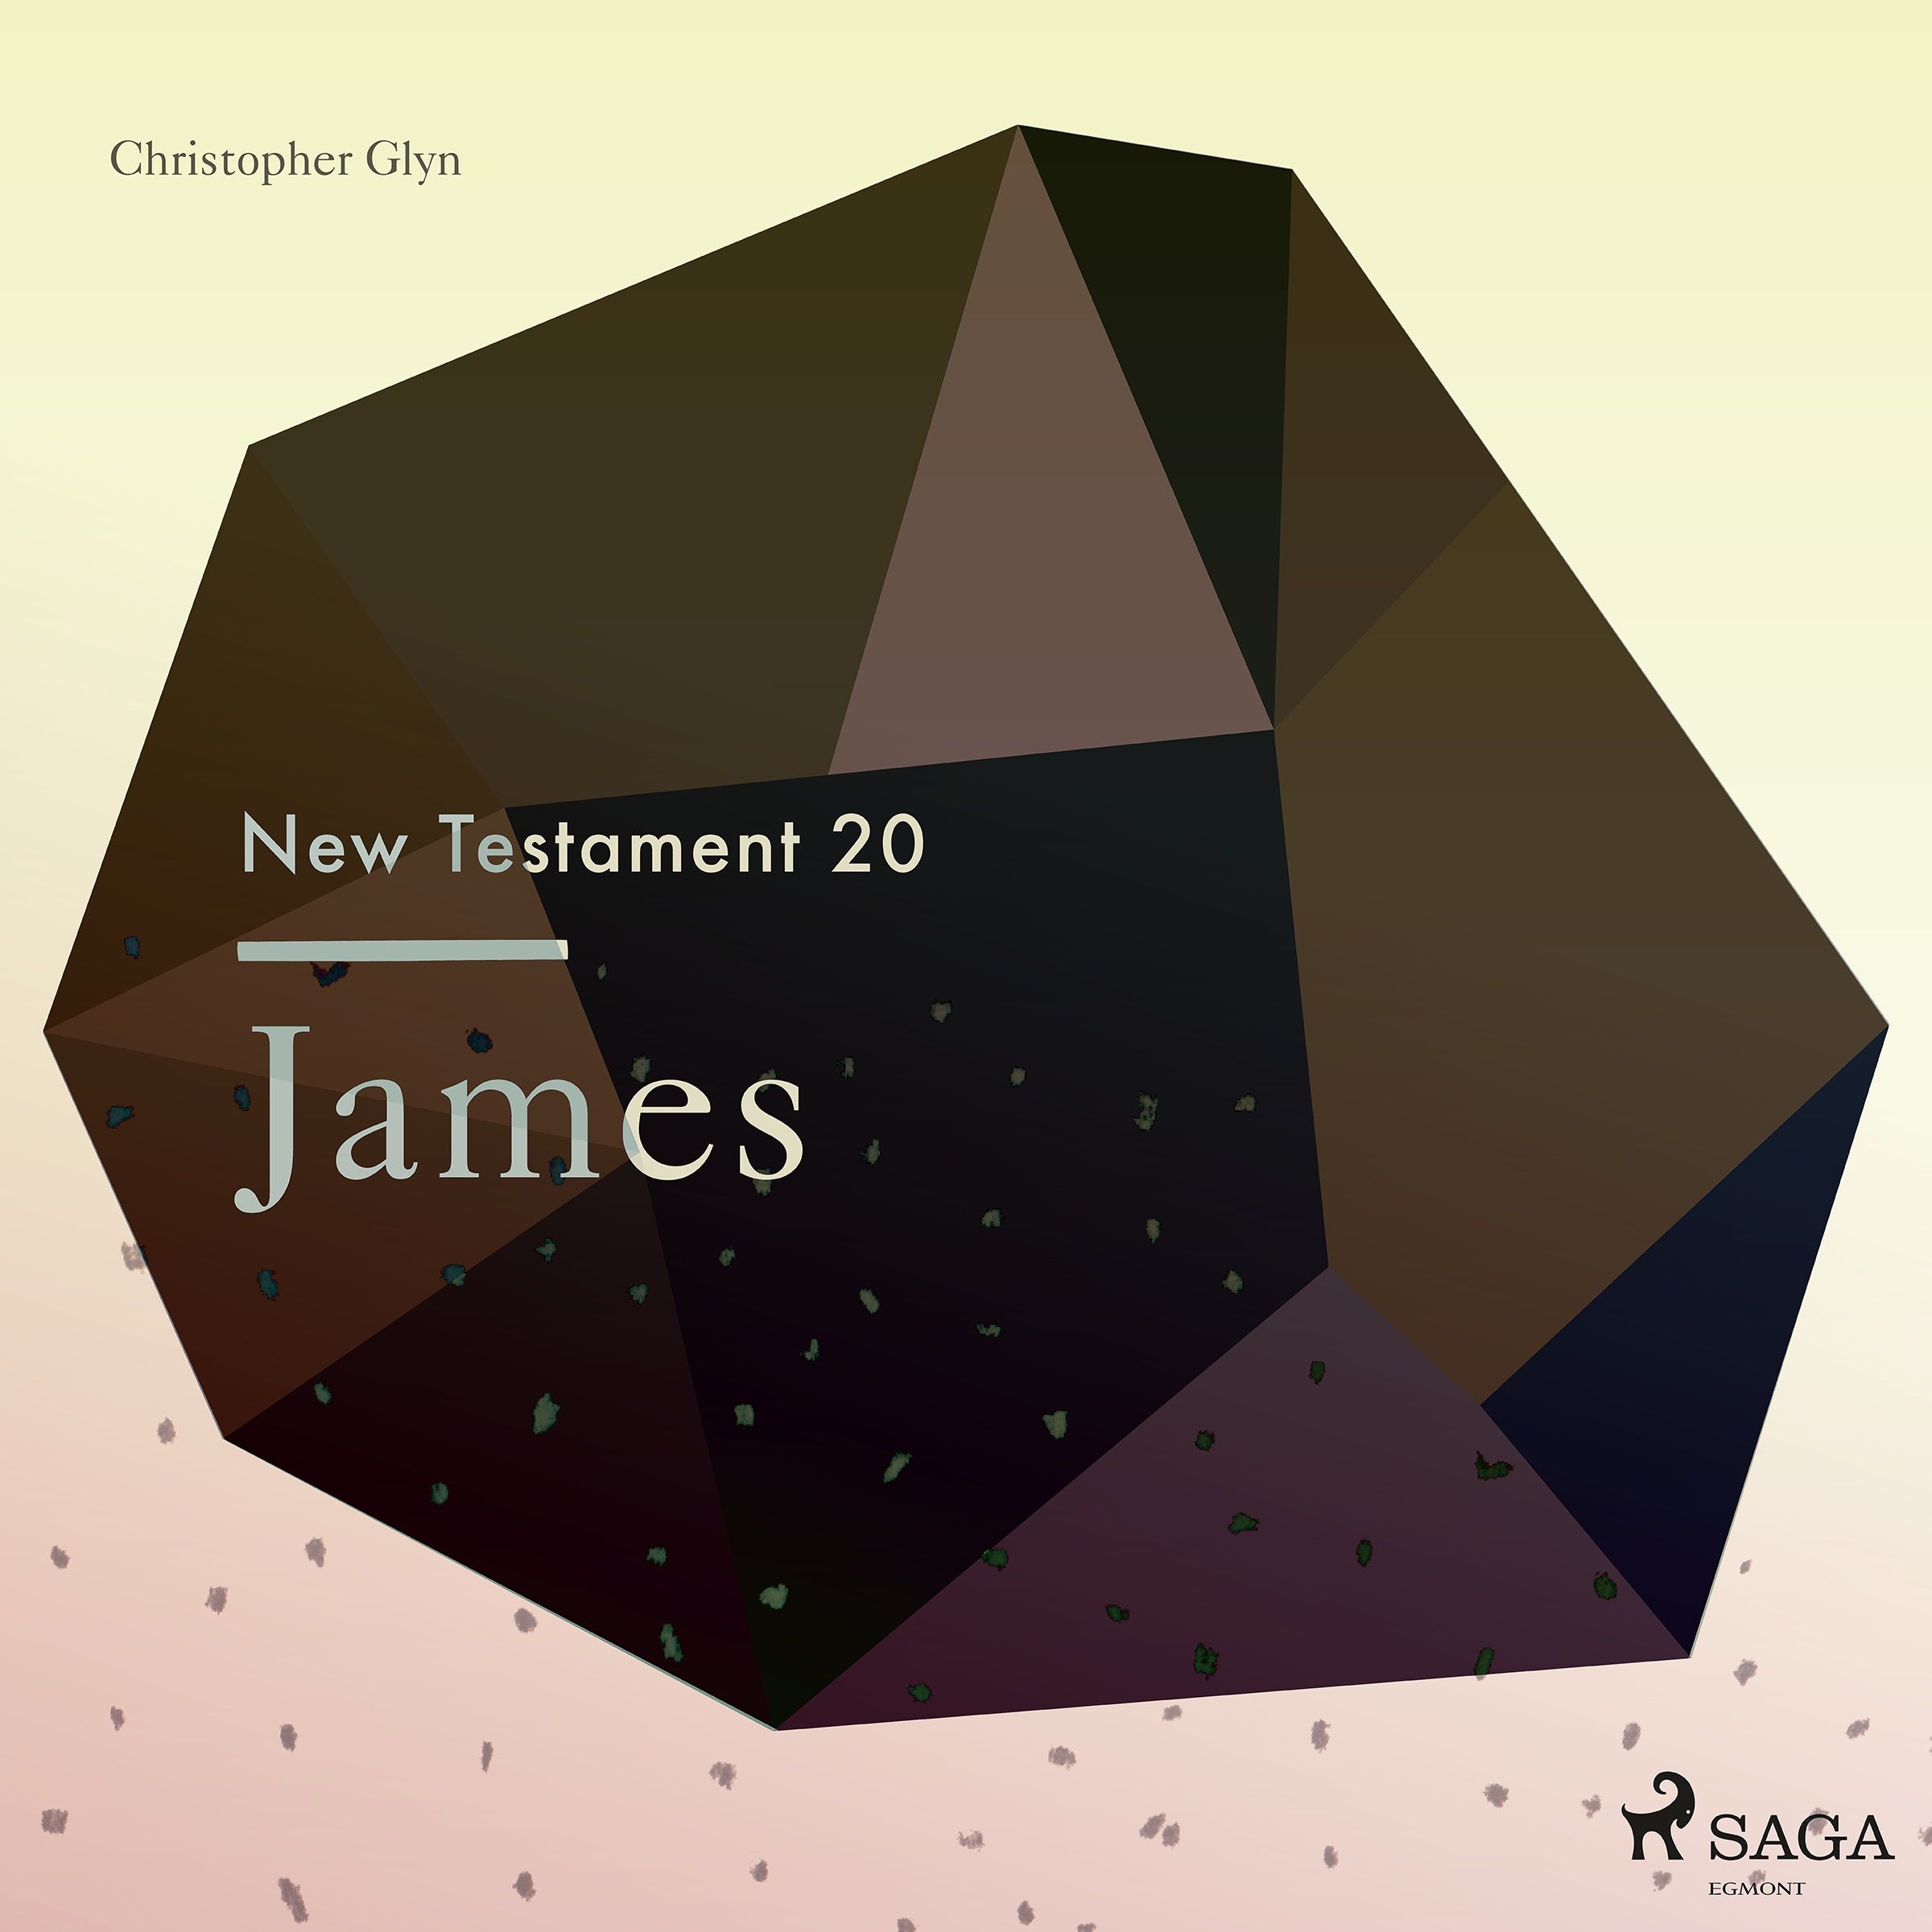 The New Testament 20 - James, audiobook by Christopher Glyn